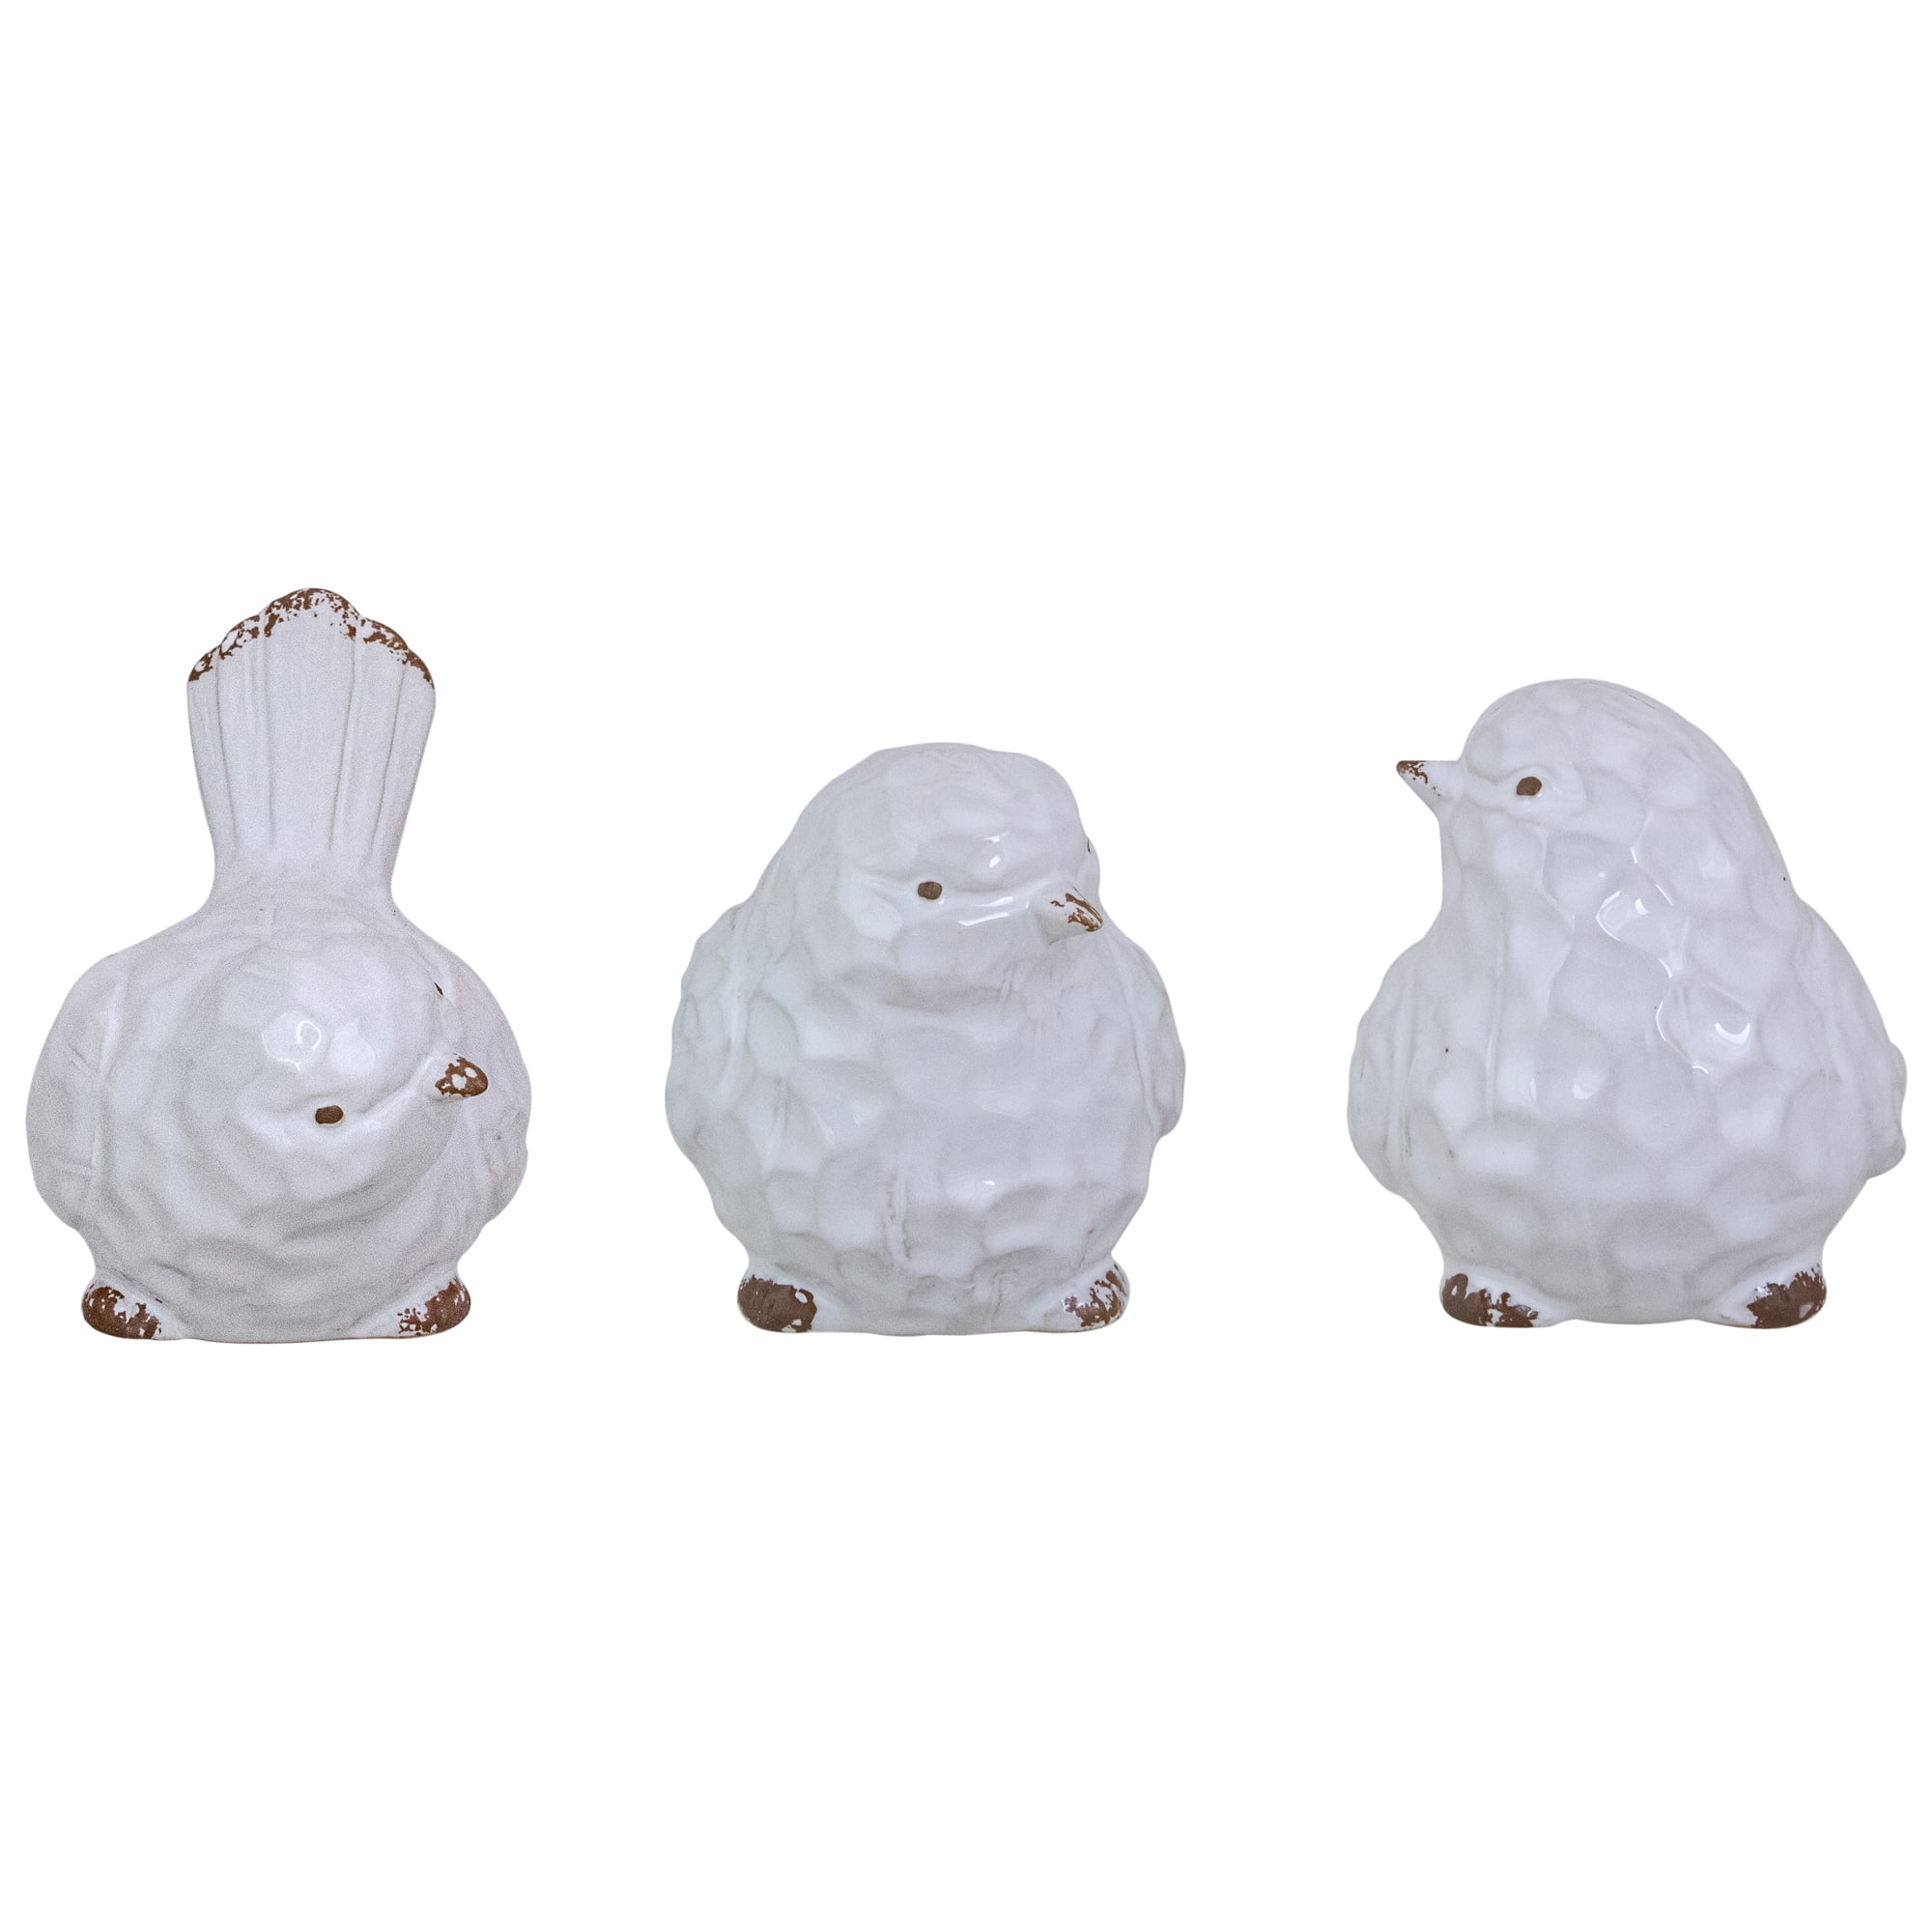 Urban Trends 50137 Ceramic Sitting Bird Figurine with Head Turned to The Side and Patterened Design Body Set of Two Gloss Finish White